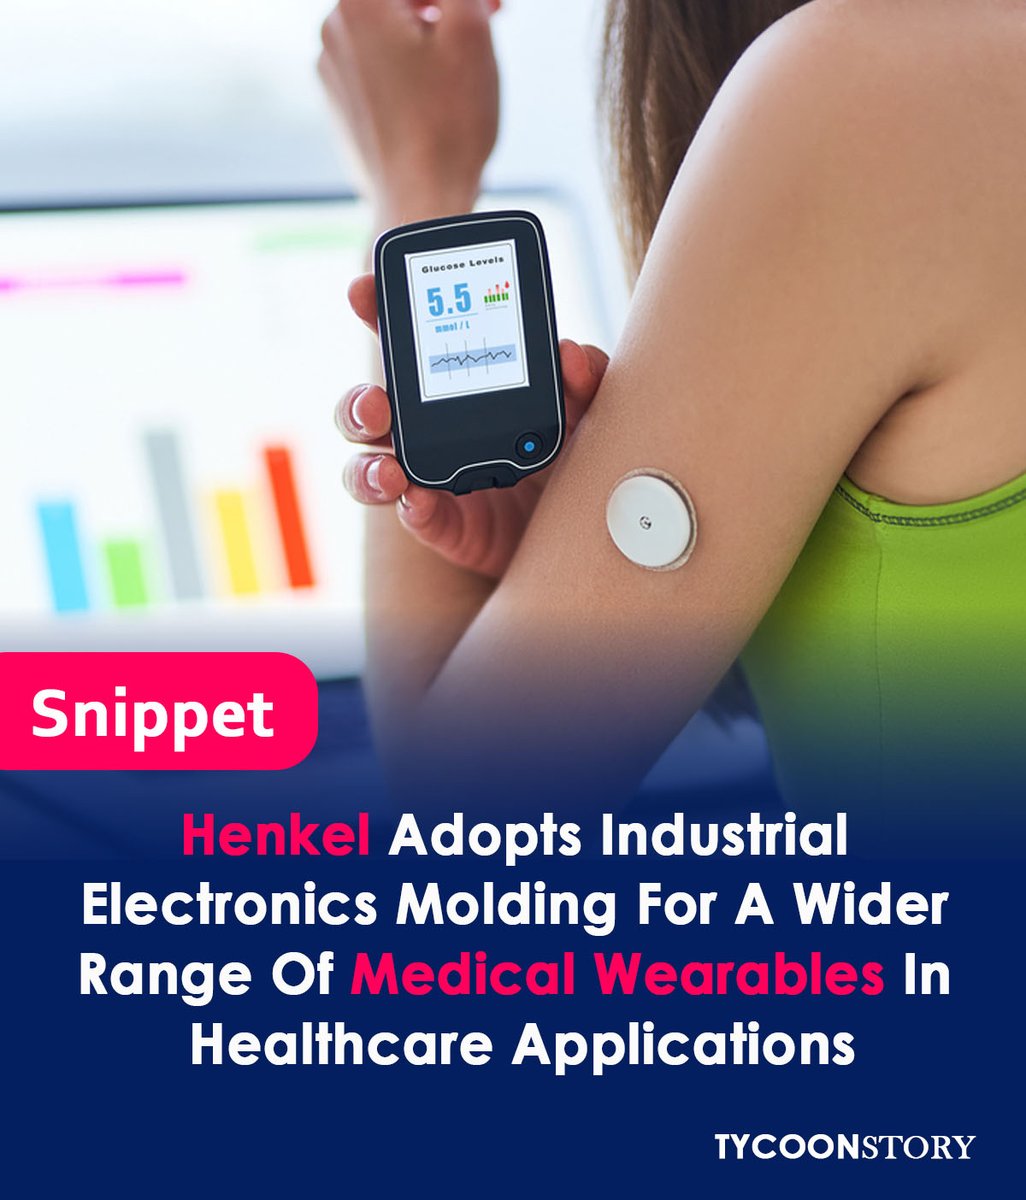 Henkel Uses Industrial Electronics Molding To Create Medical Wearables, Replacing Clamshell Housings
#injectionmolding #MoldingTechnology #innovation #healthcare #healthmonitors #medicaldevices  #WearableSensors #medicalinnovation #smartglasses #businessdevelopment @Henkel